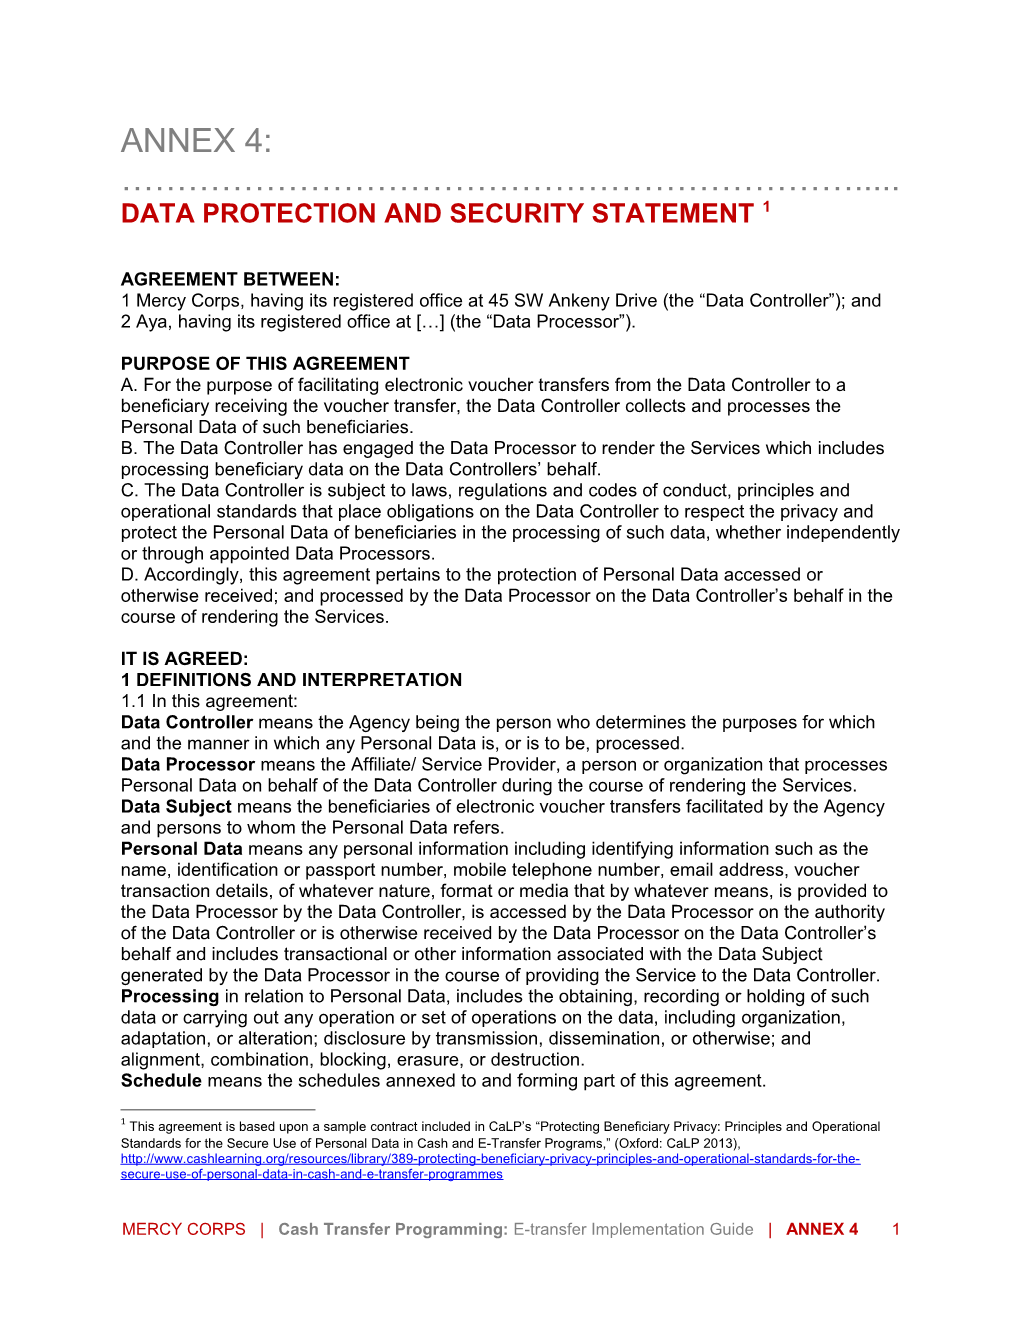 Data Protection and Security Statement 1